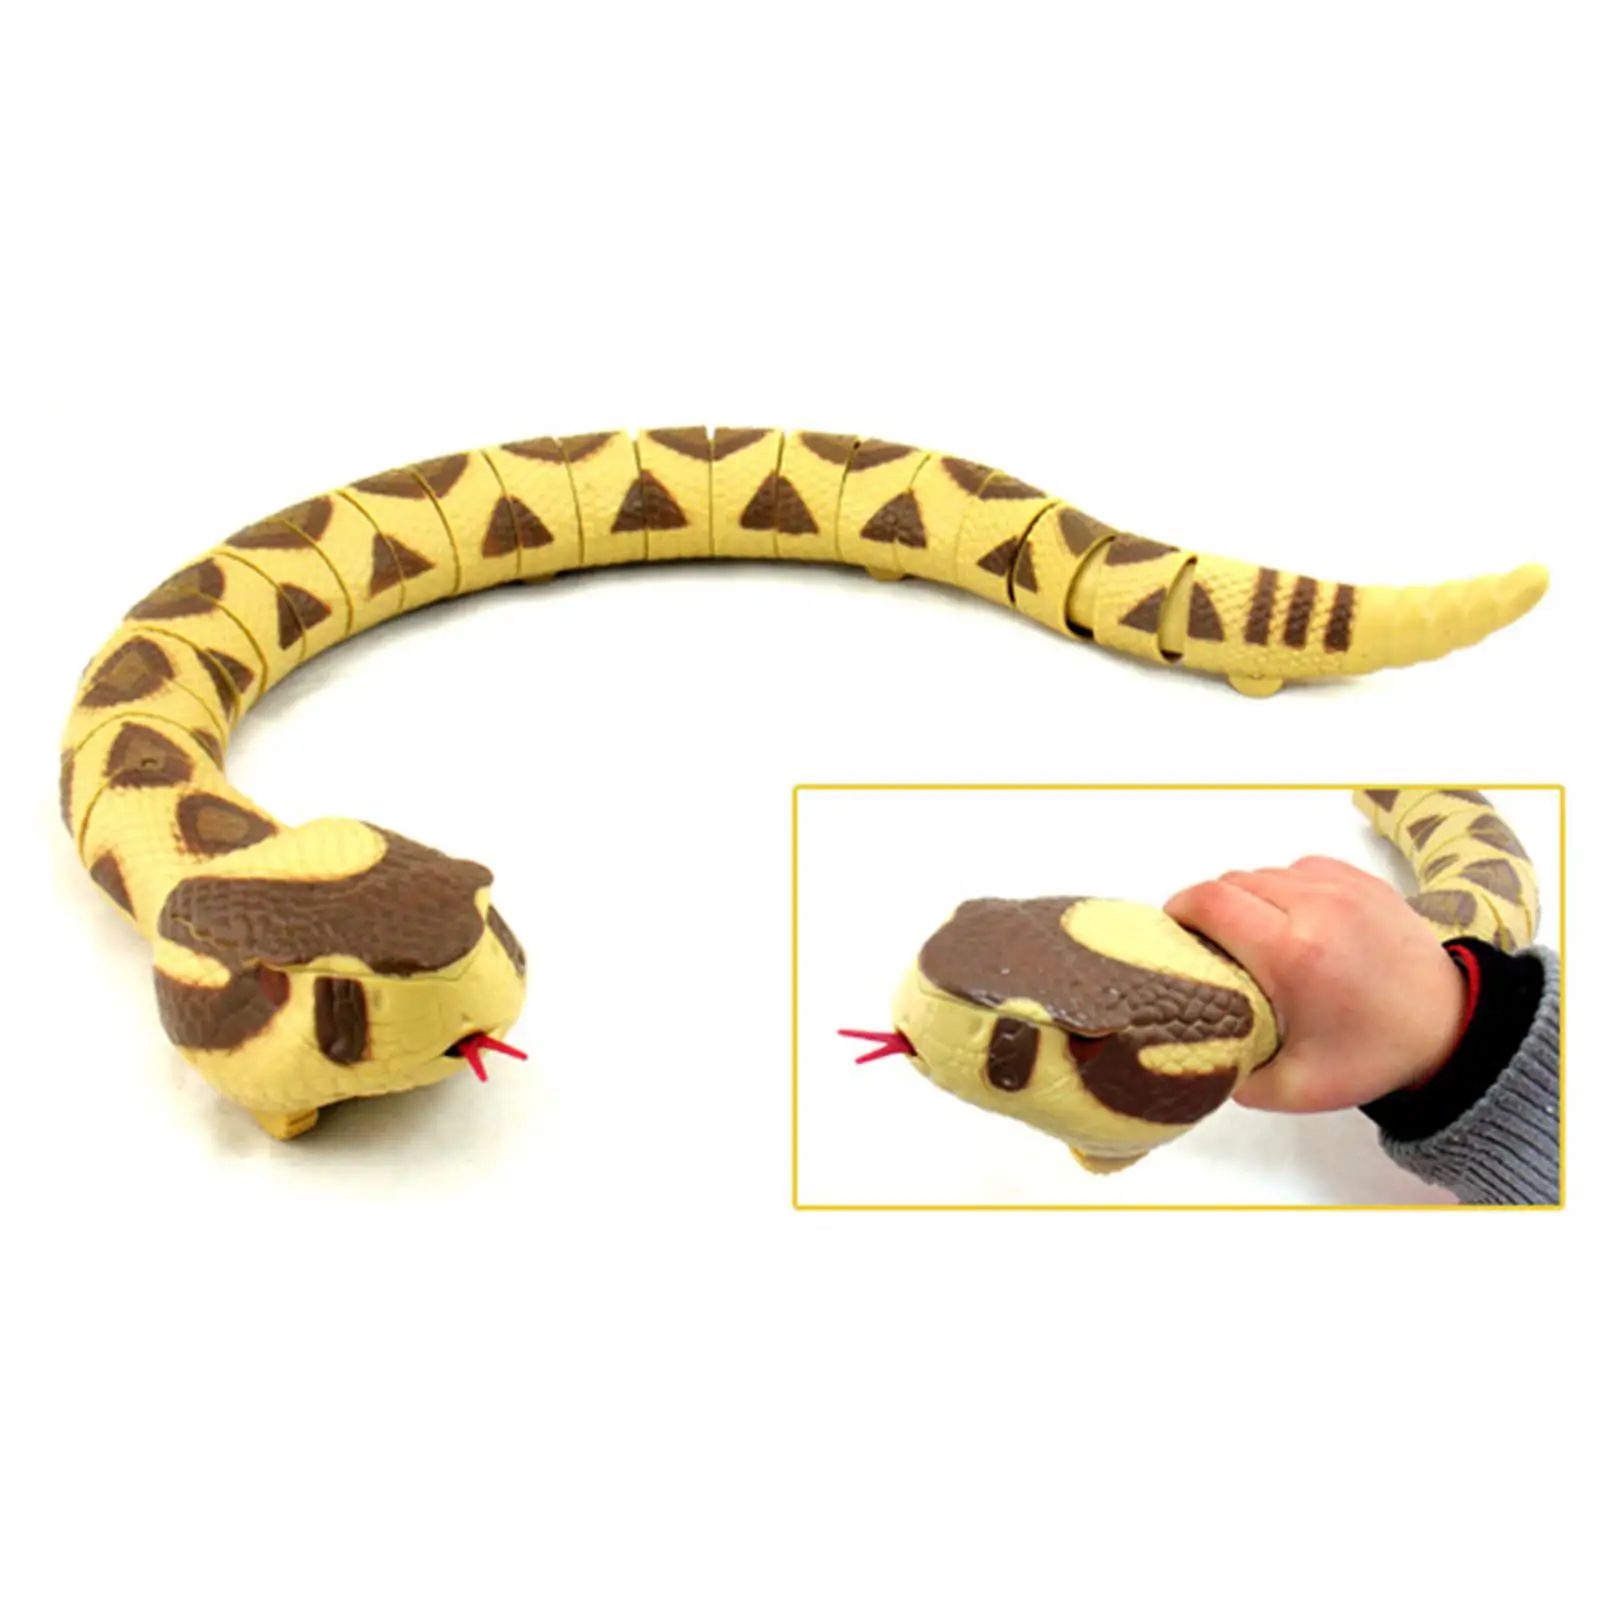 Lifelike RC Snake Toys Scary Snake Toy Artifical Snake Model Party Favors for Party Tricks Jokes Prop Holiday Gifts